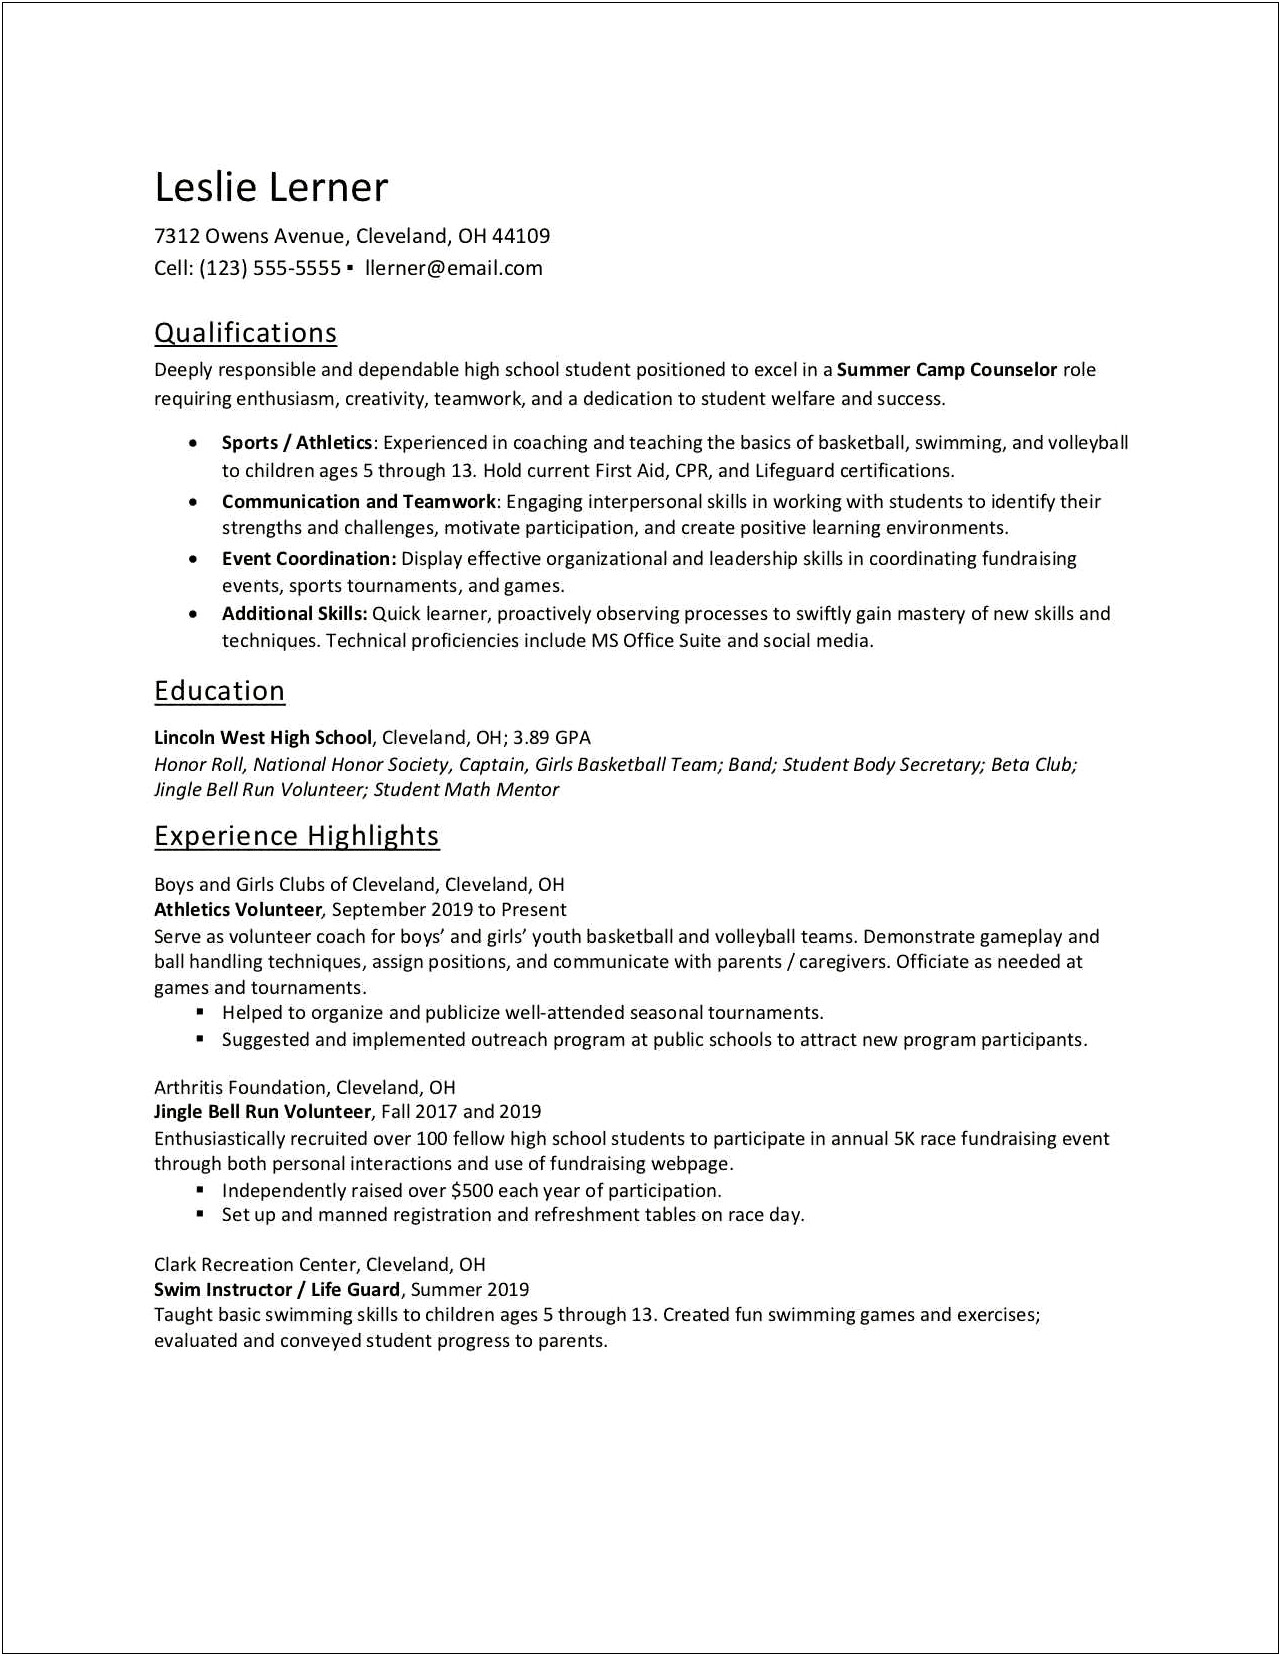 Functional Resume For High School Student